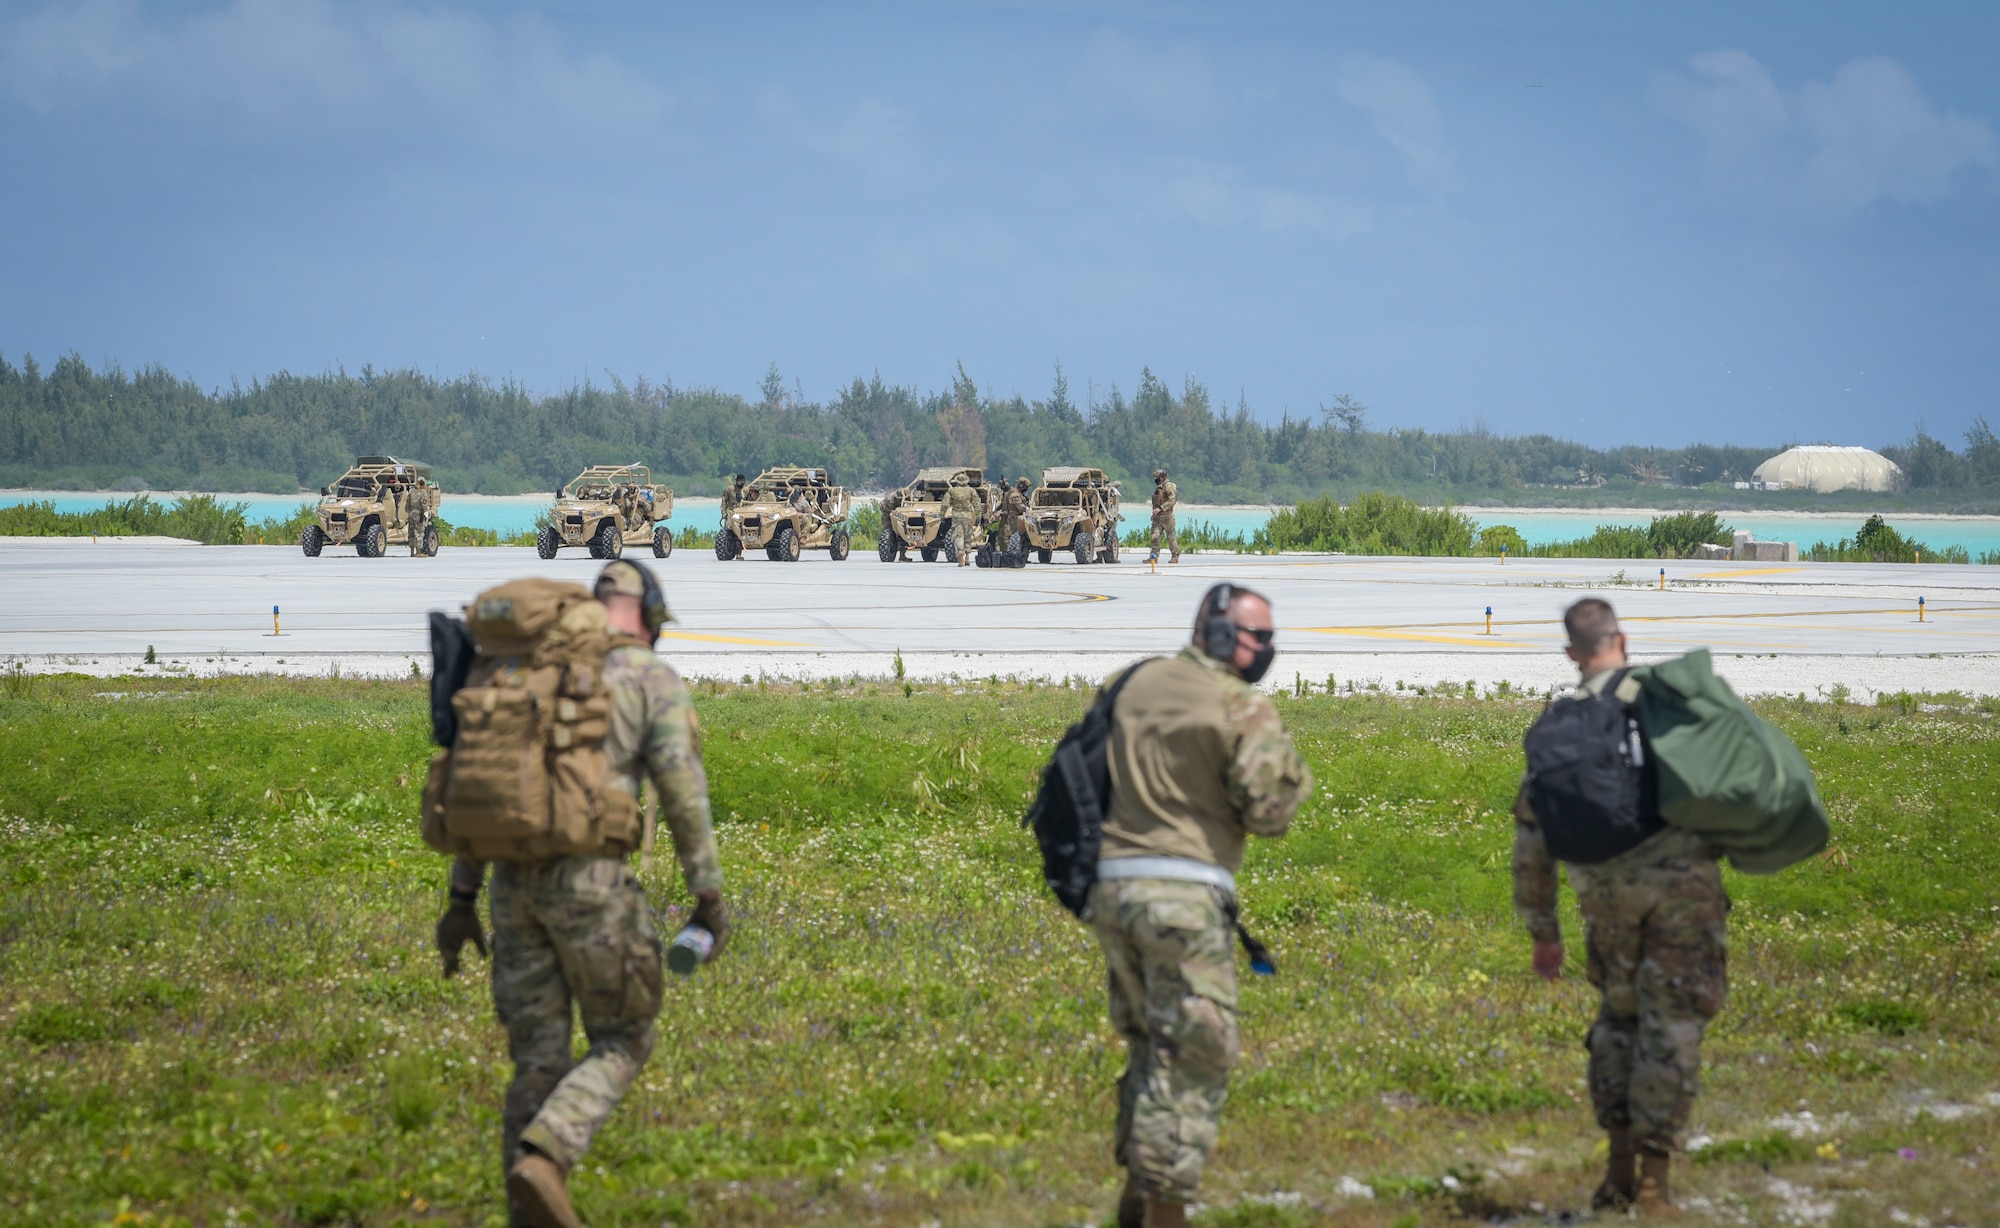 U.S. Air Force Airmen assigned to the 36th Contingency Response Group, prepare to conduct a field training exercise on Wake Island, Western Pacific, April 2, 2021.